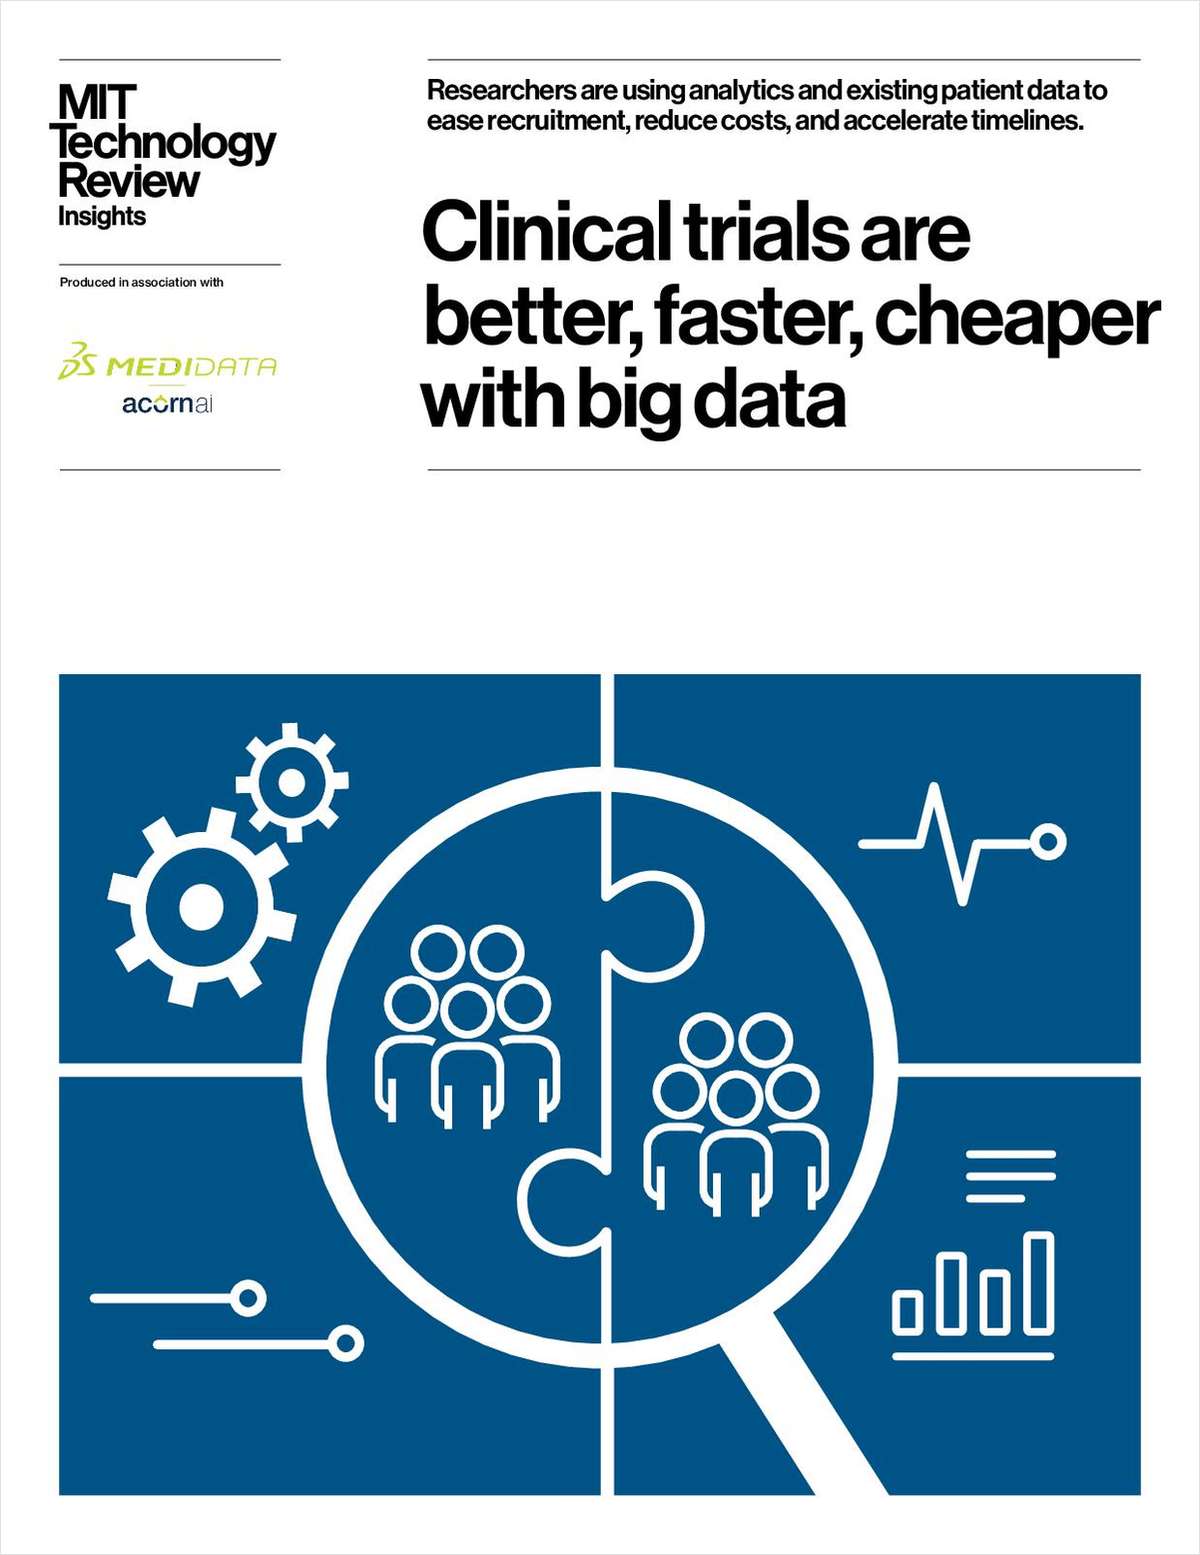 MIT Tech Review: Clinical trials are better, faster, cheaper with big data